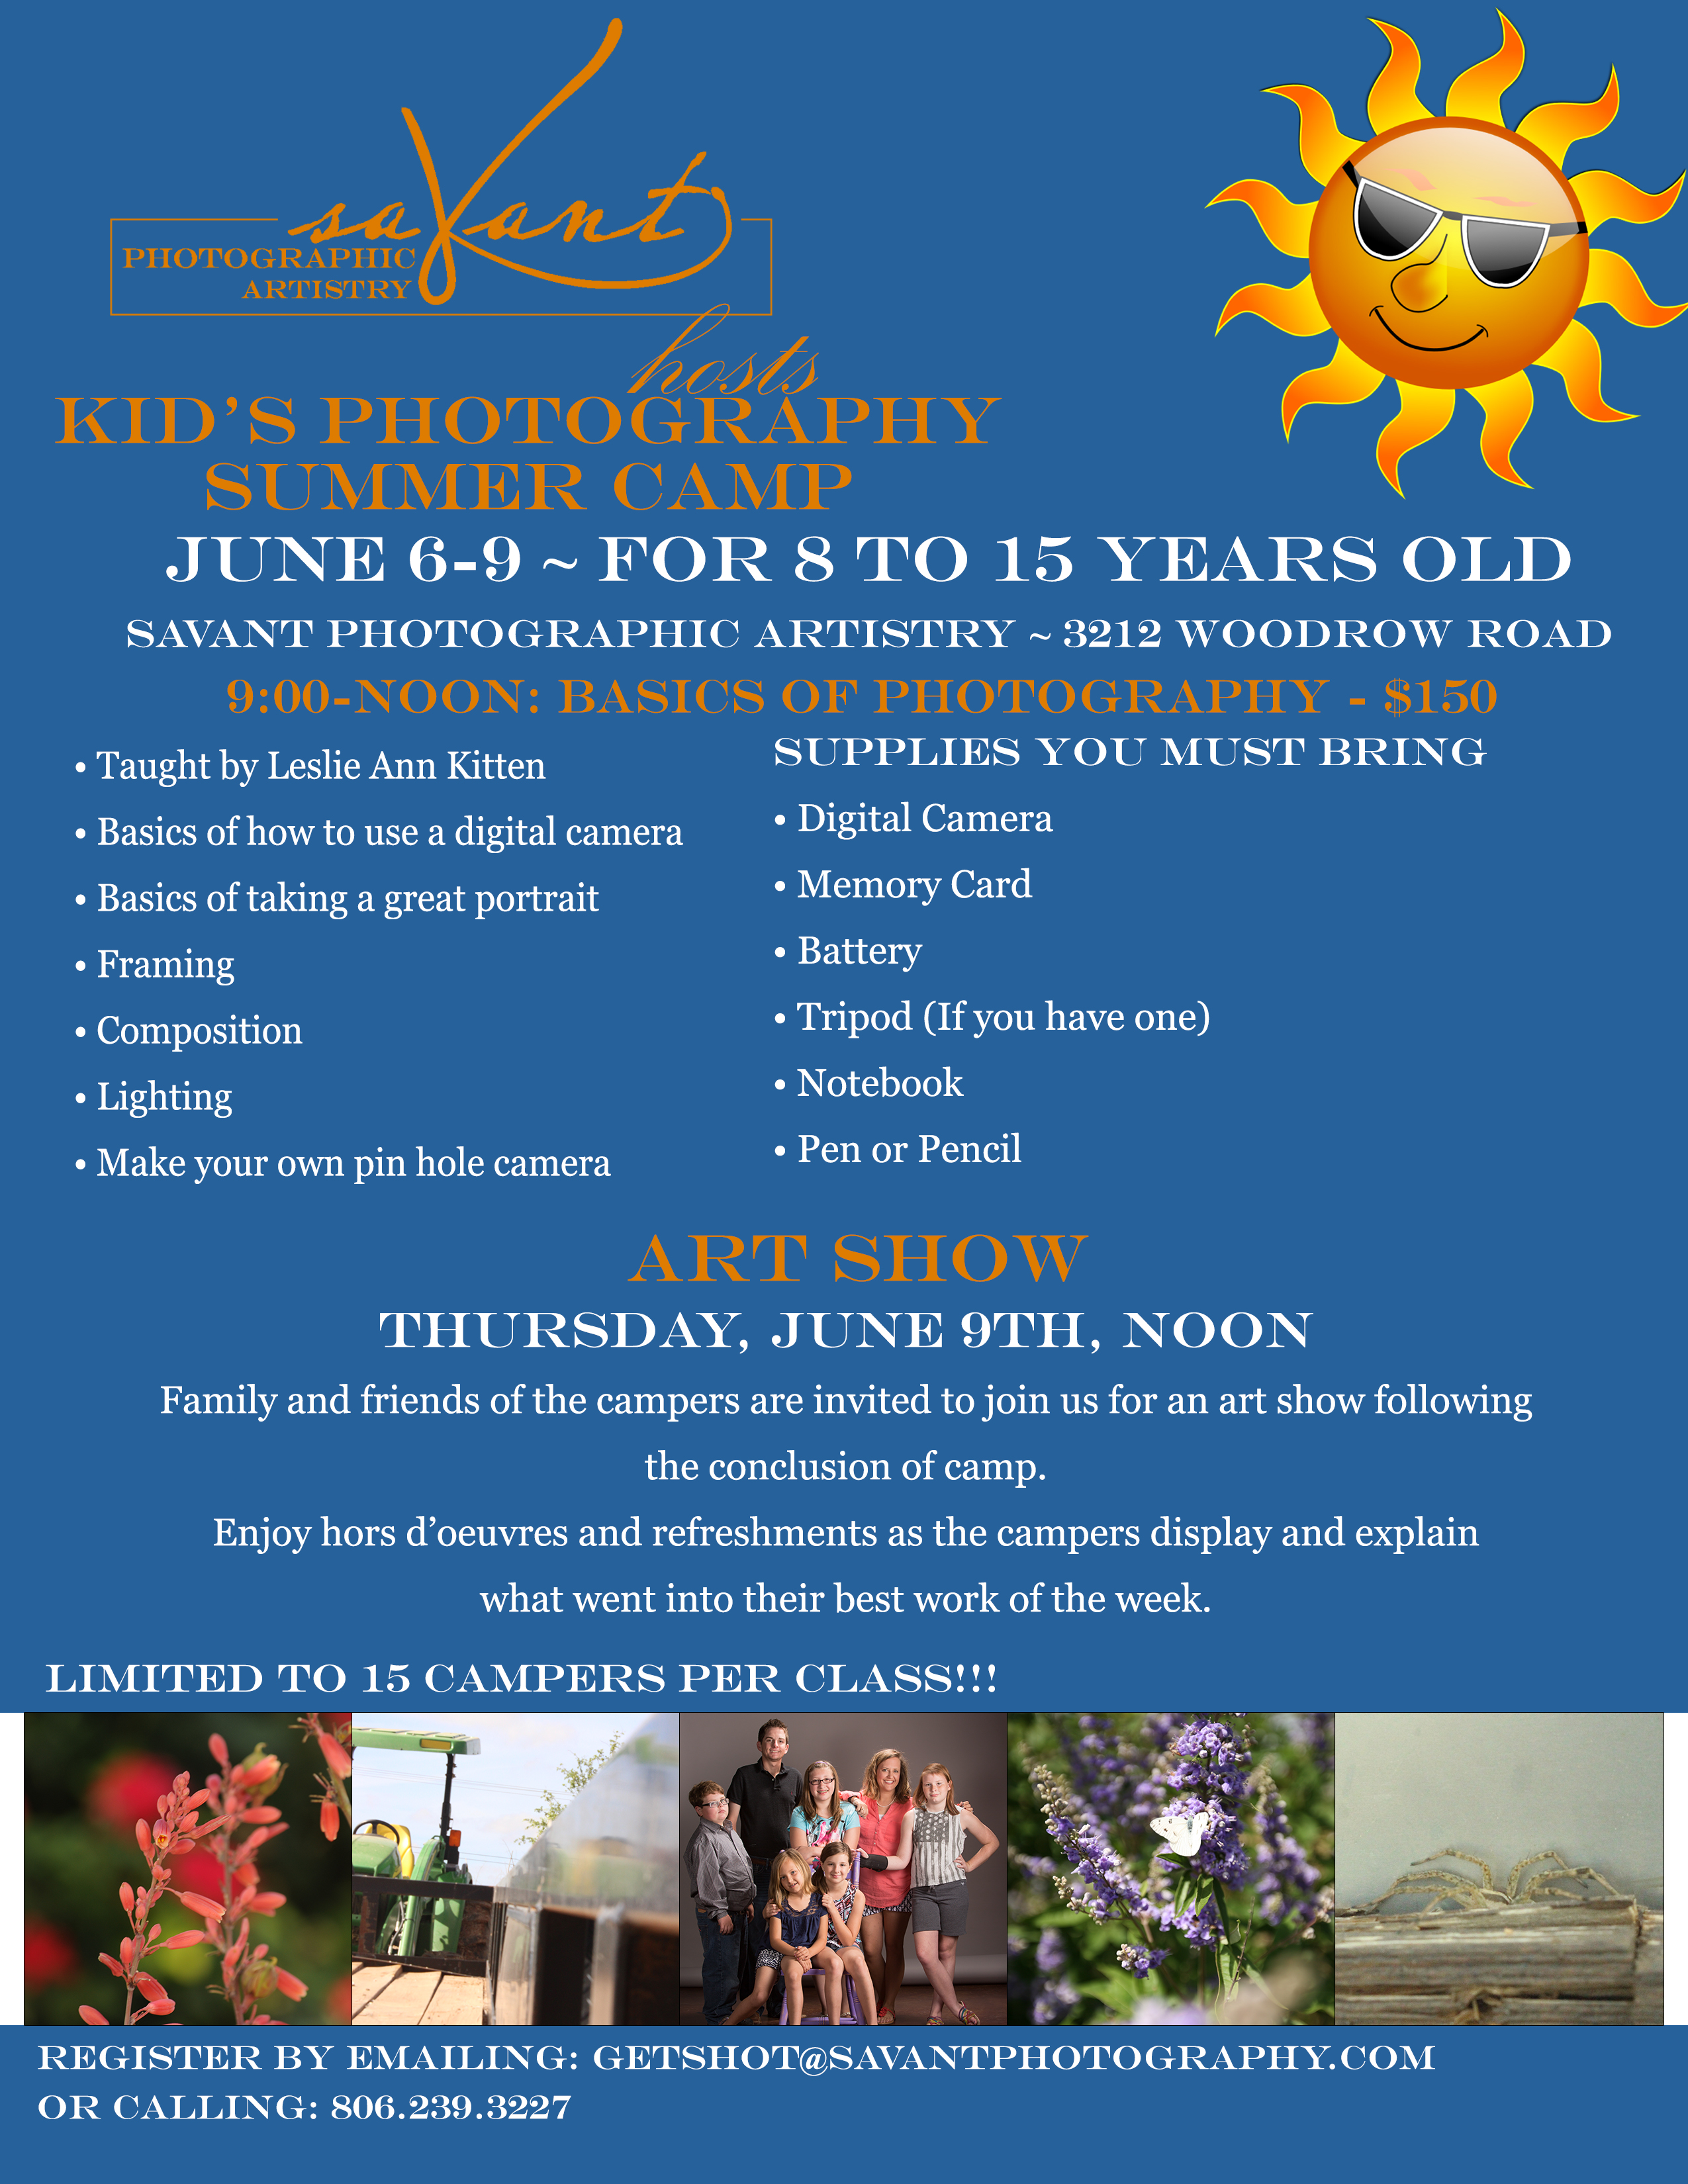 Kid’s Photography Summer Camp 2016